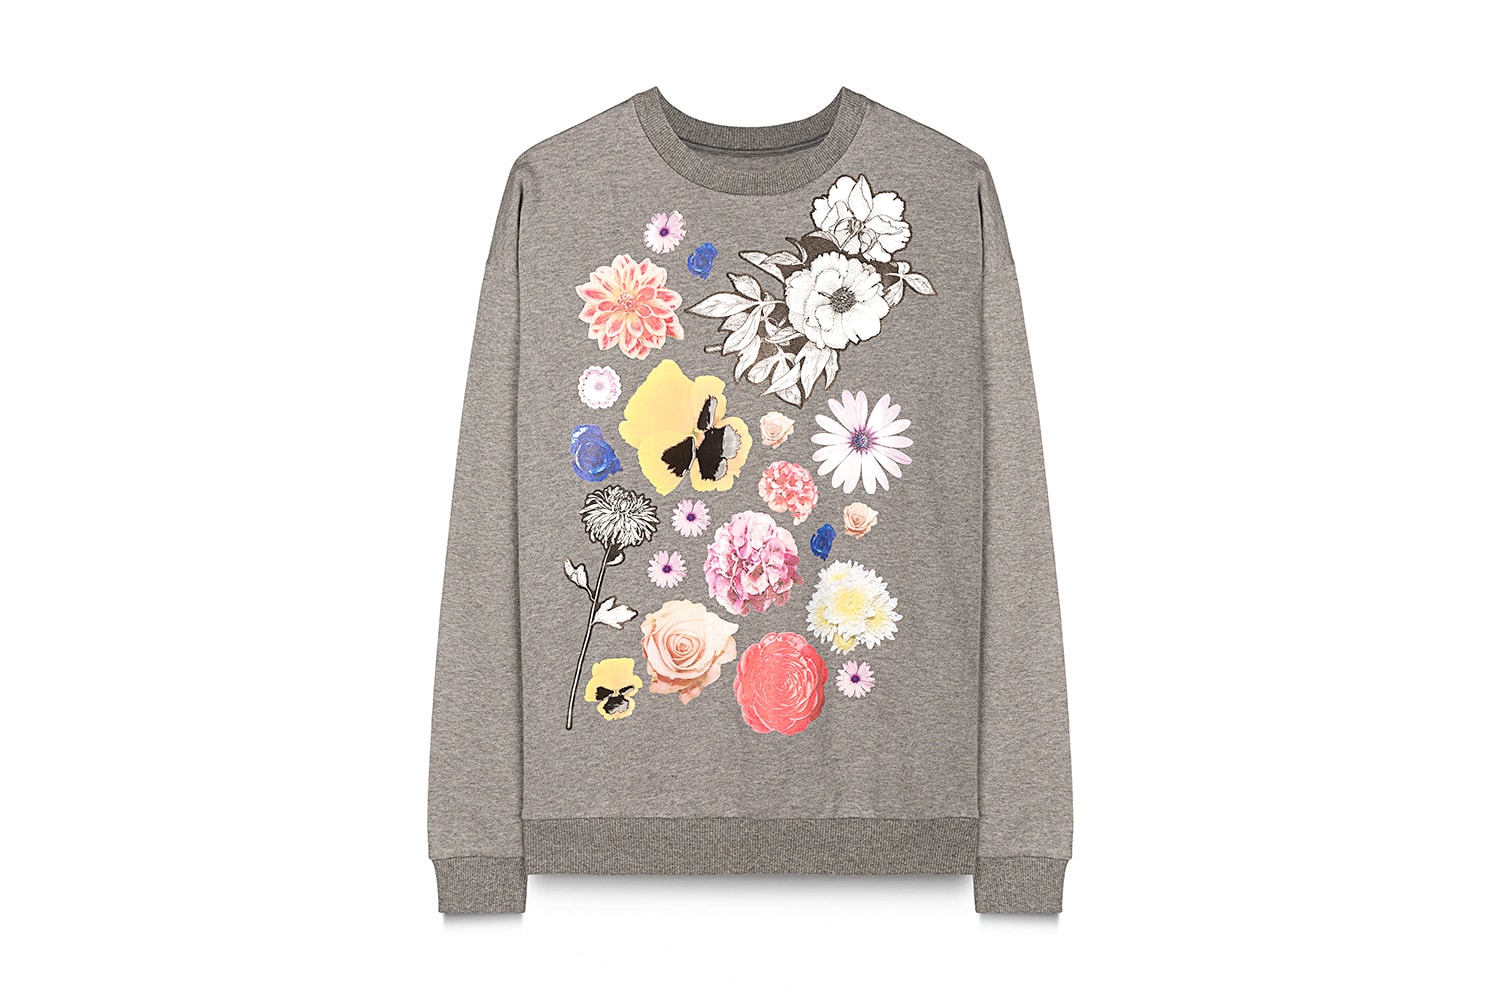 Christopher Kane 10th Anniversary Capsule Collection sweatshirts archive prints chimp floral volcanoes